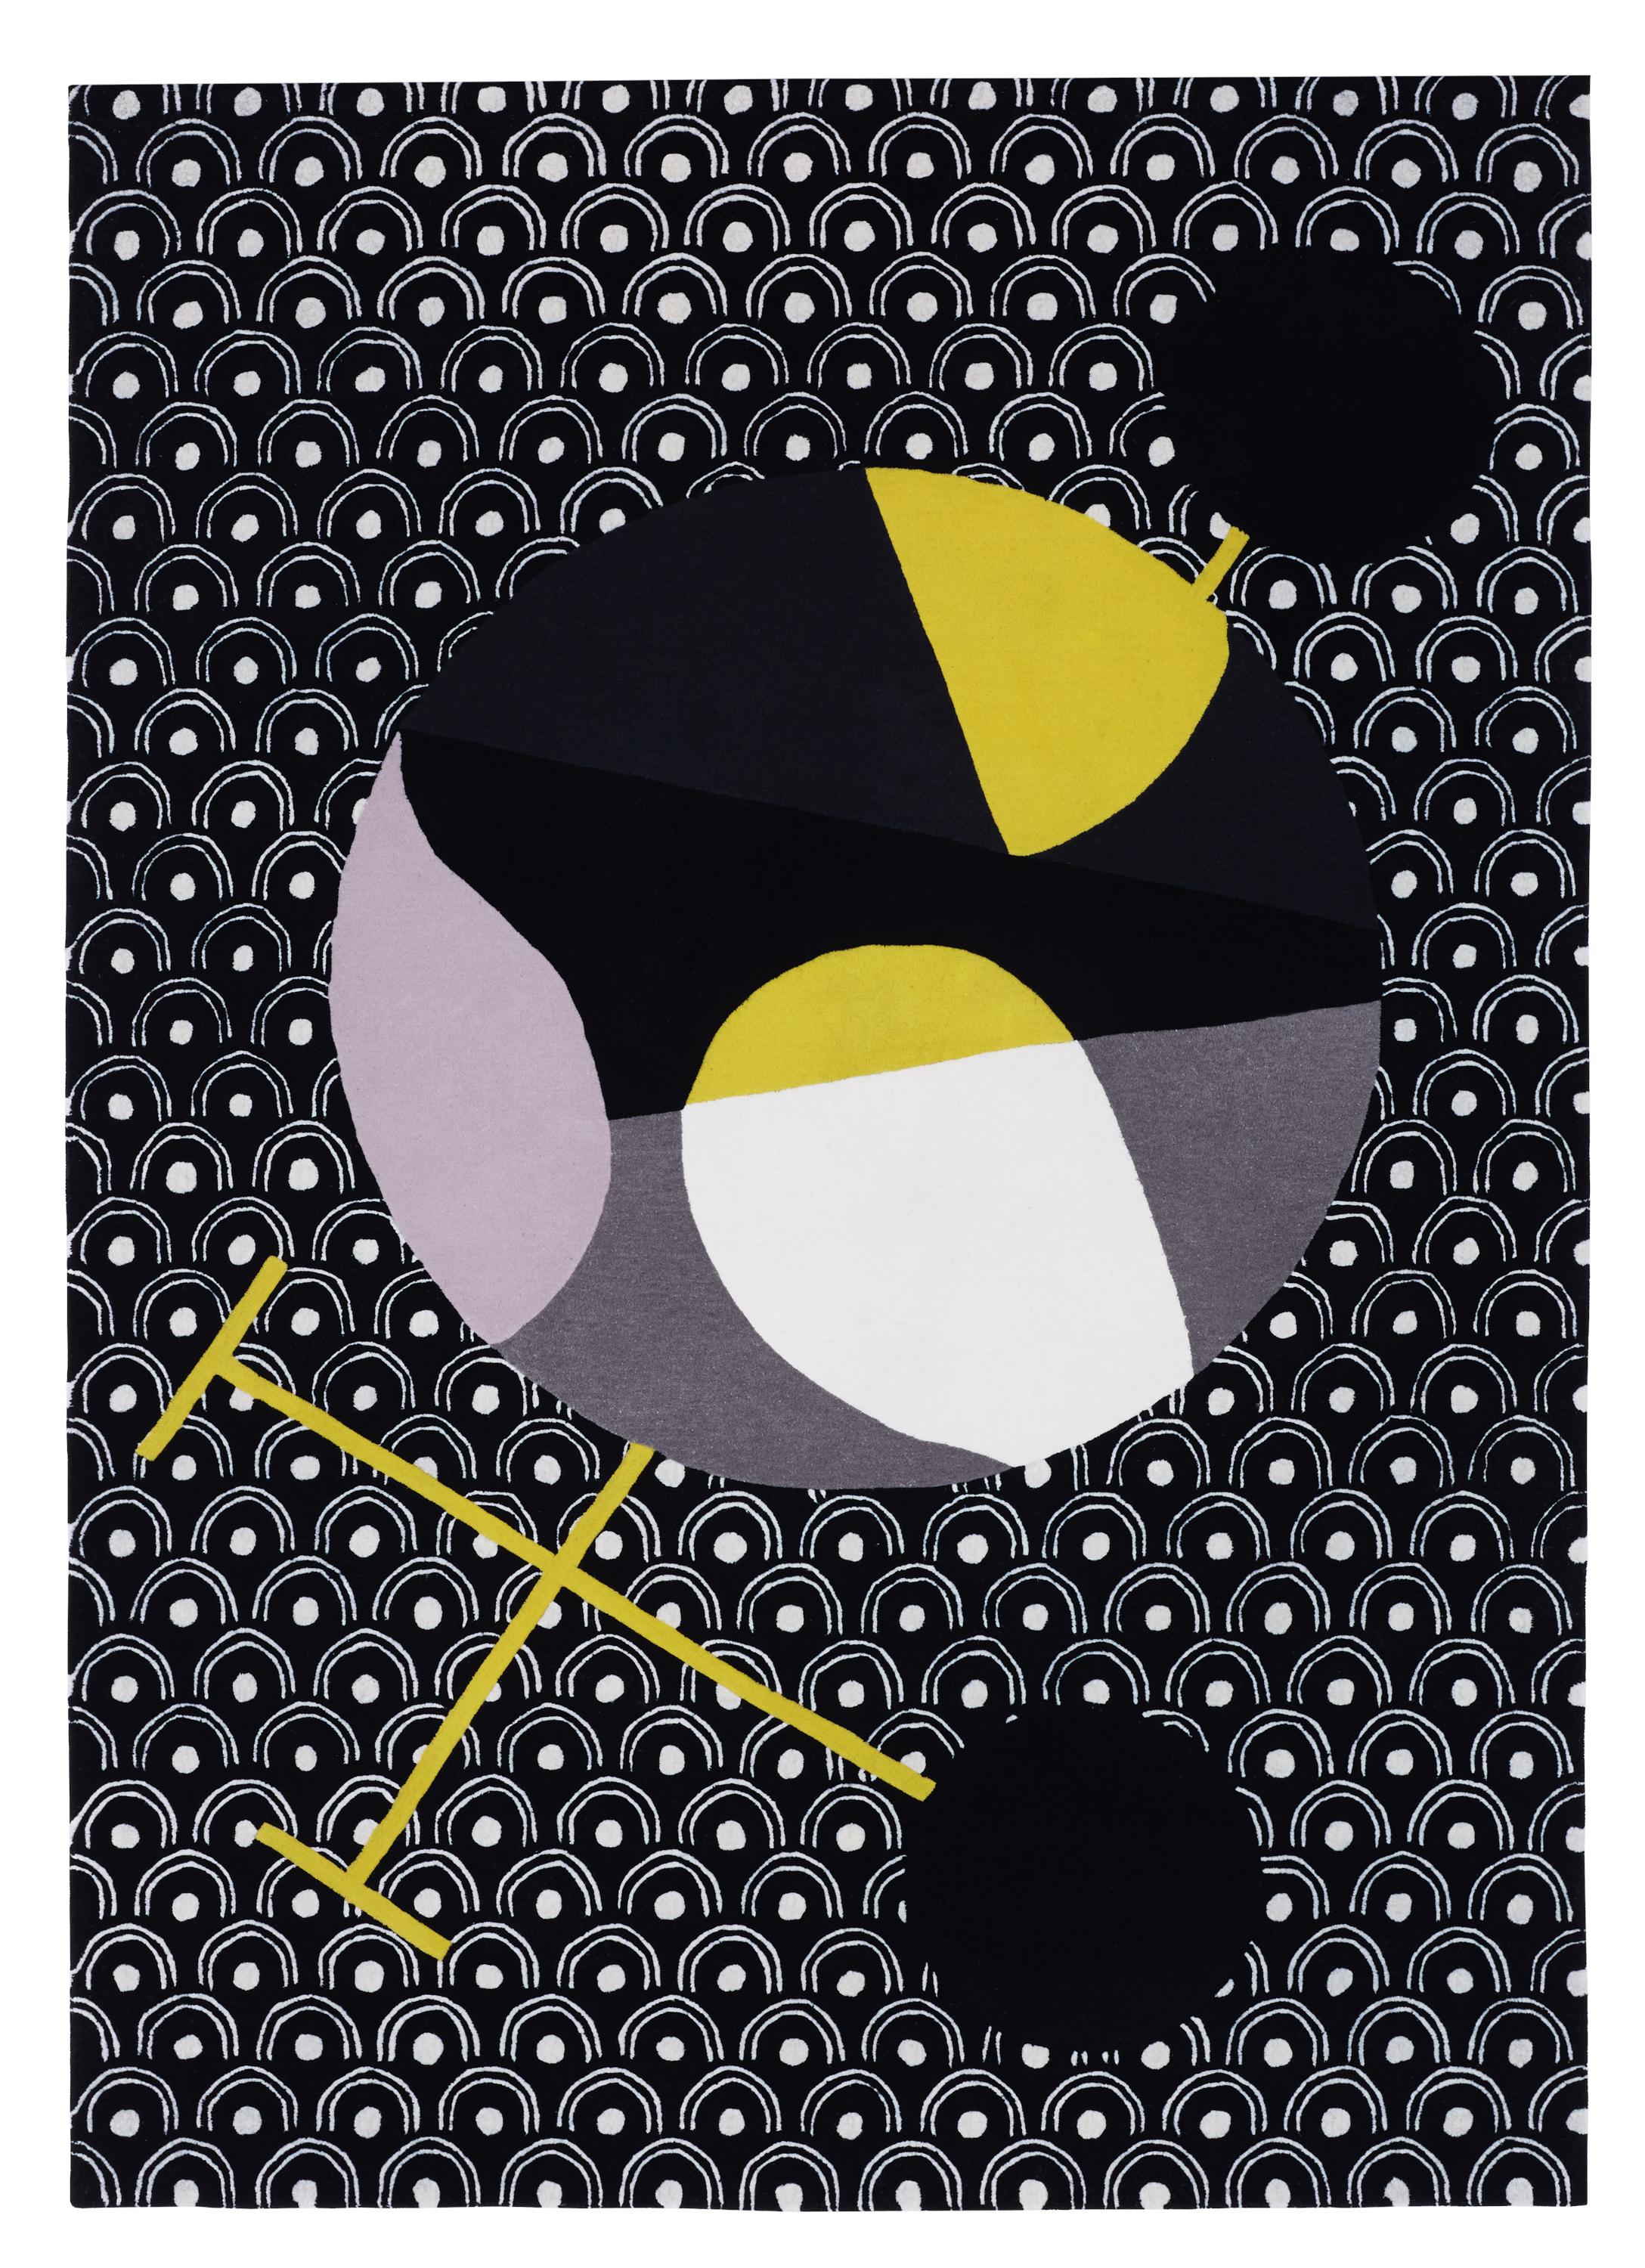 Abstract Dadaist Contemporary rug inspired by Sophie Taeuber Arp
Artist: Sophie Taeuber Arp
Dimensions: W 170 x D 240 CM
New-Zealand wool and silk

Japanese Abstractions is a collection of nine pieces, all designed around the concept of the